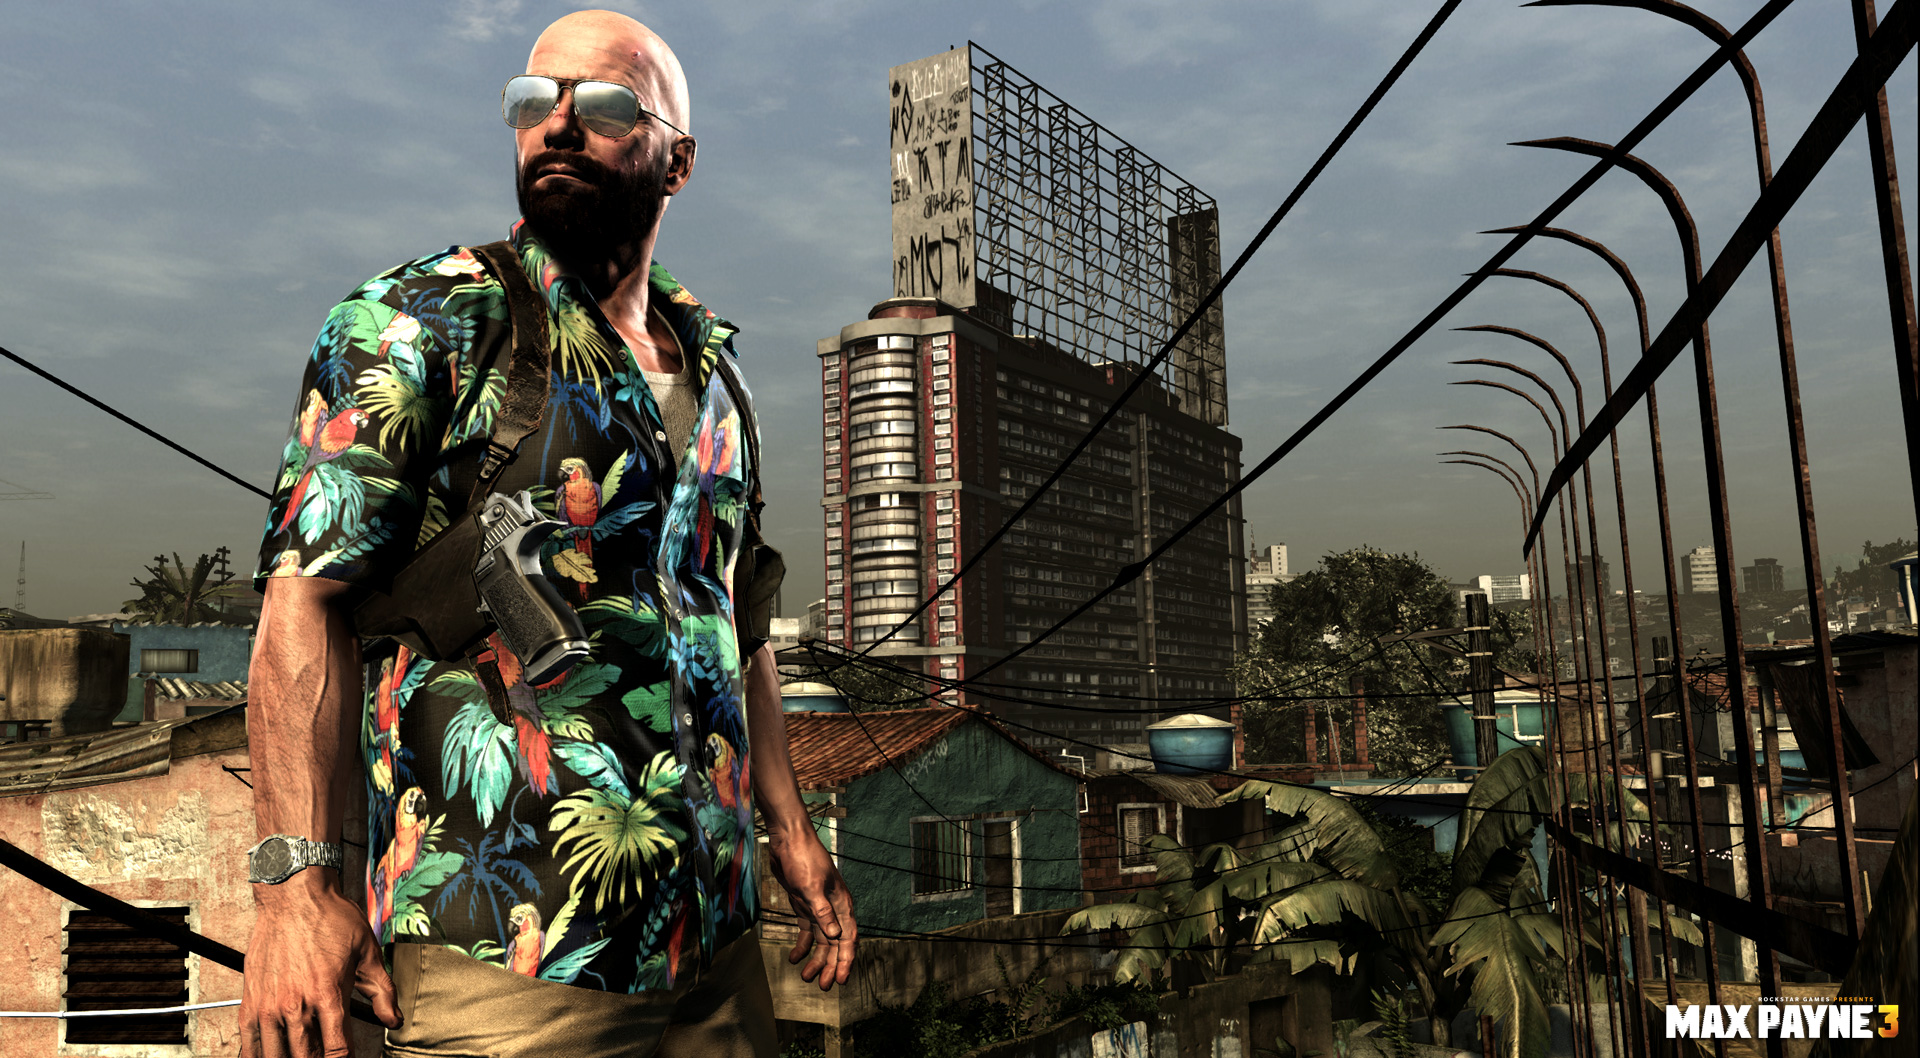 max payne 3 ps3 or pc